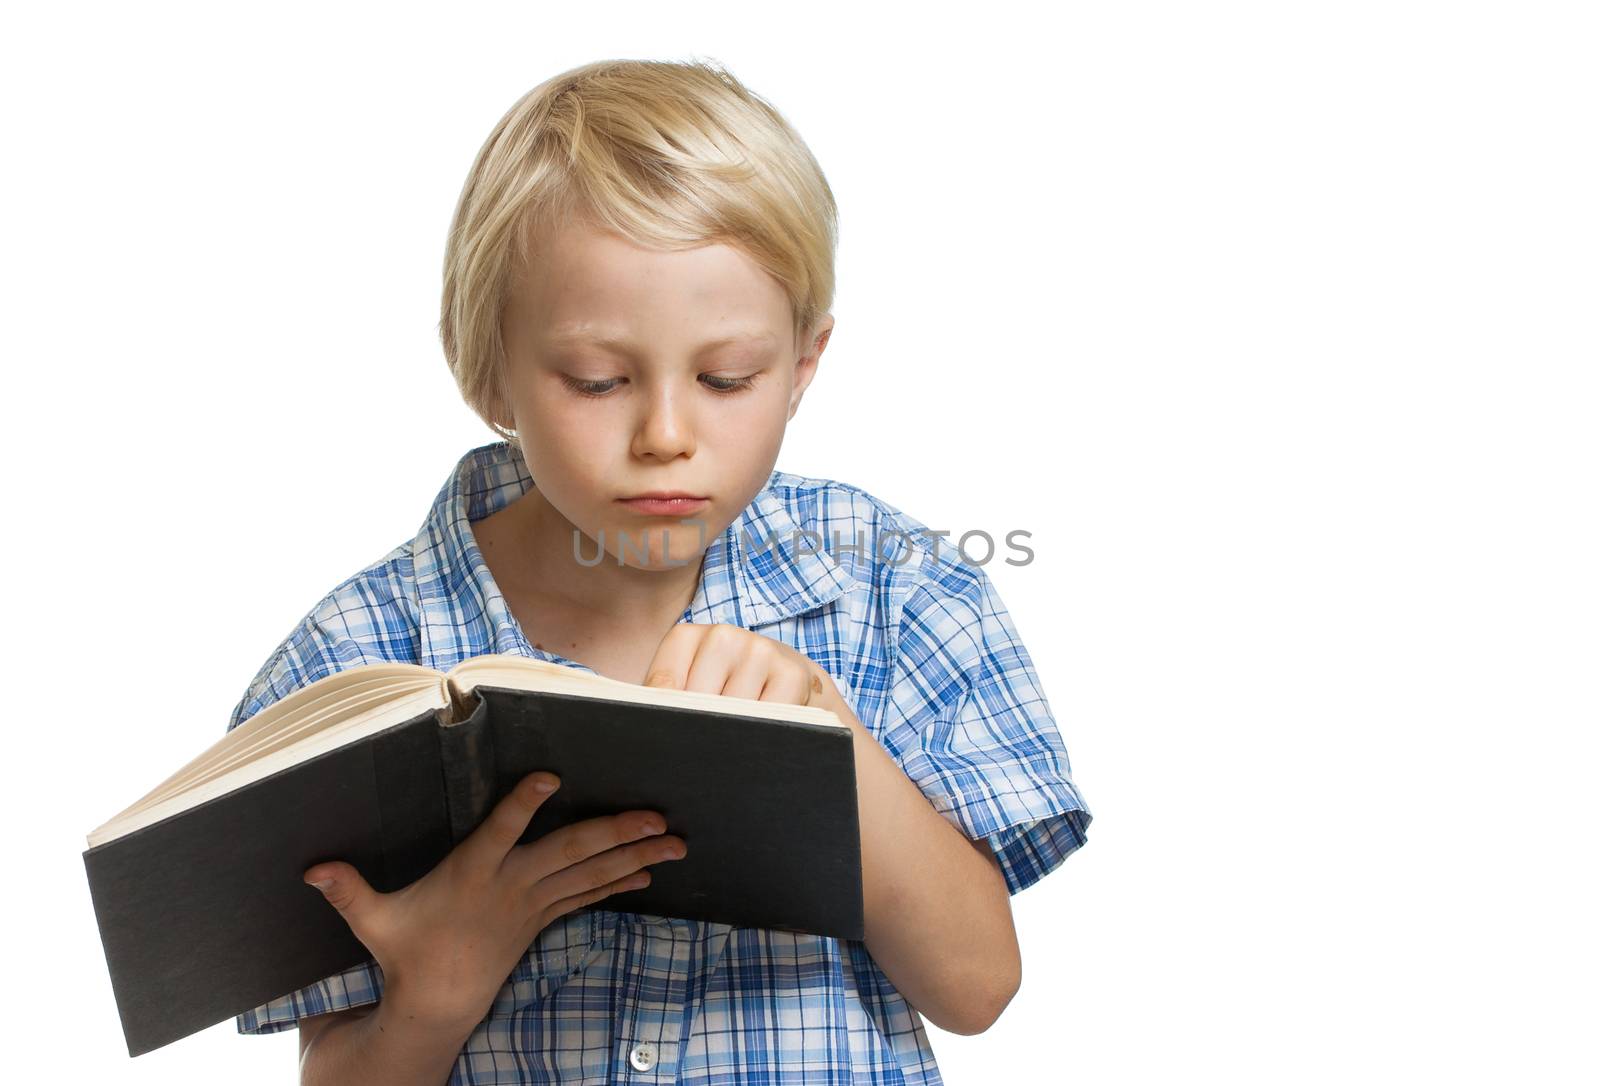 A serious young boy holding and reading a book. Isolated on white.